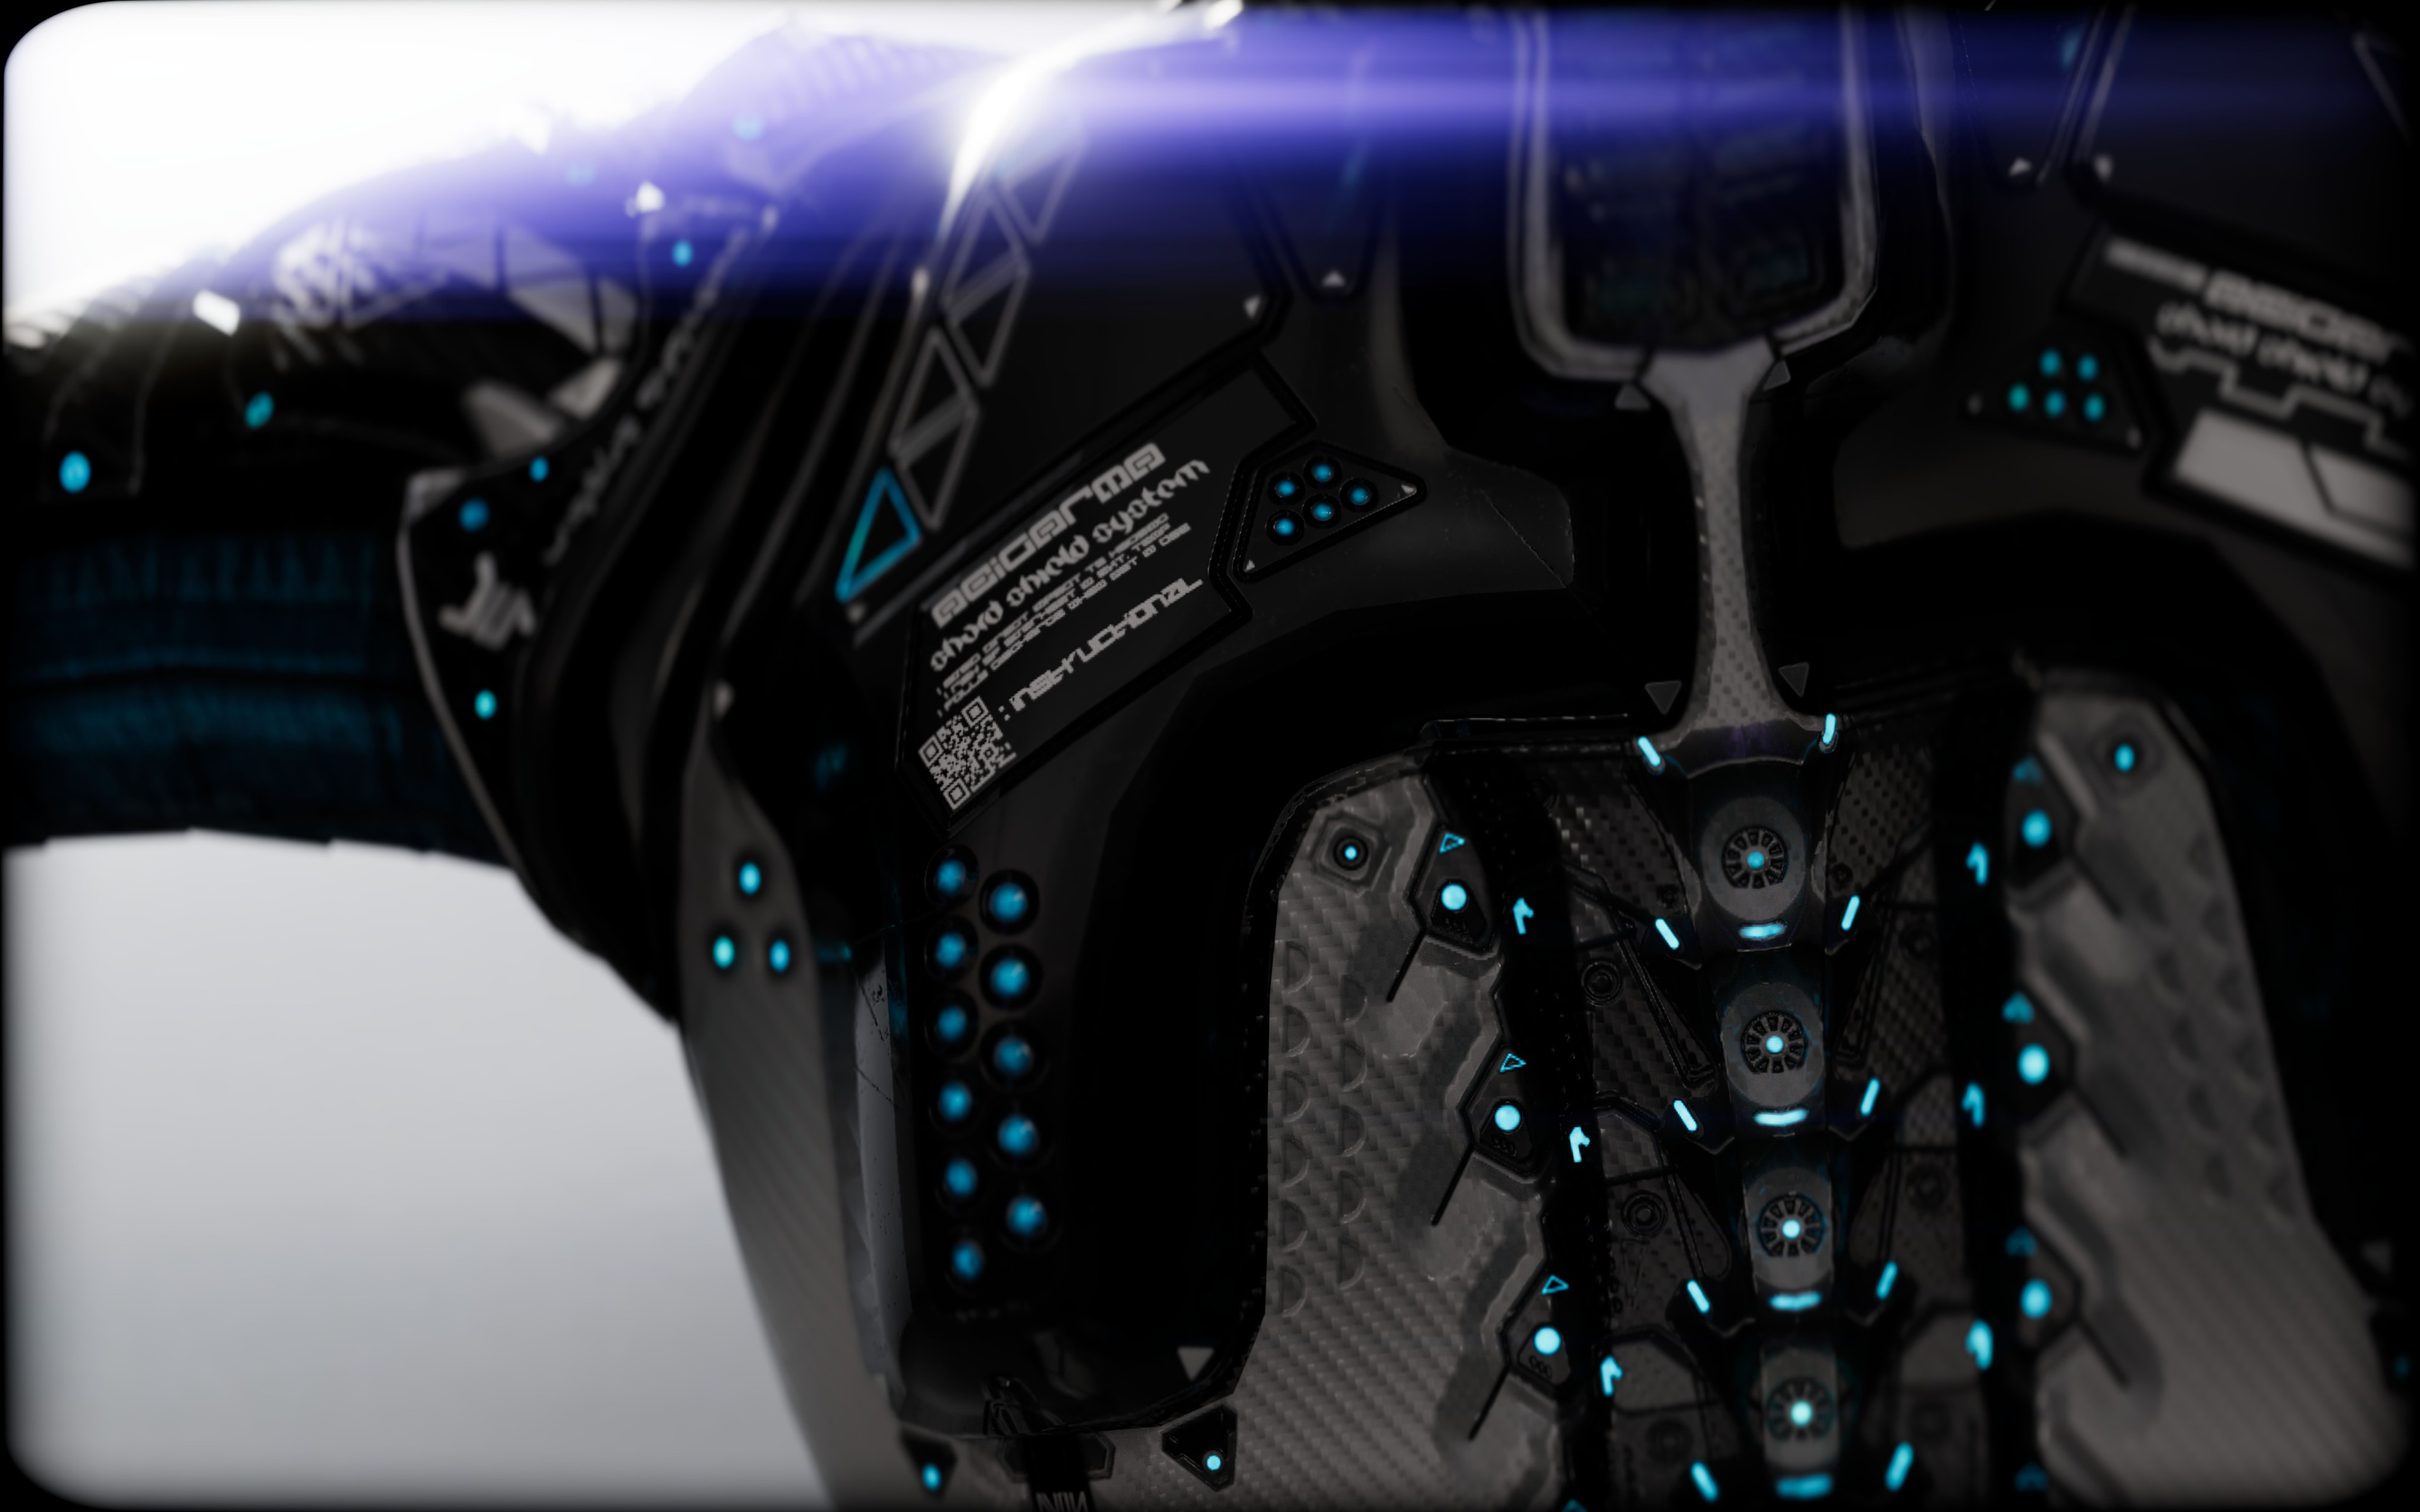 Shoulder plates. I wanted to get nerdy with lore and details, so the QR codes are functional, and the brands on the model are (fictional) producers of different aspects - armor, weapons, etc. 